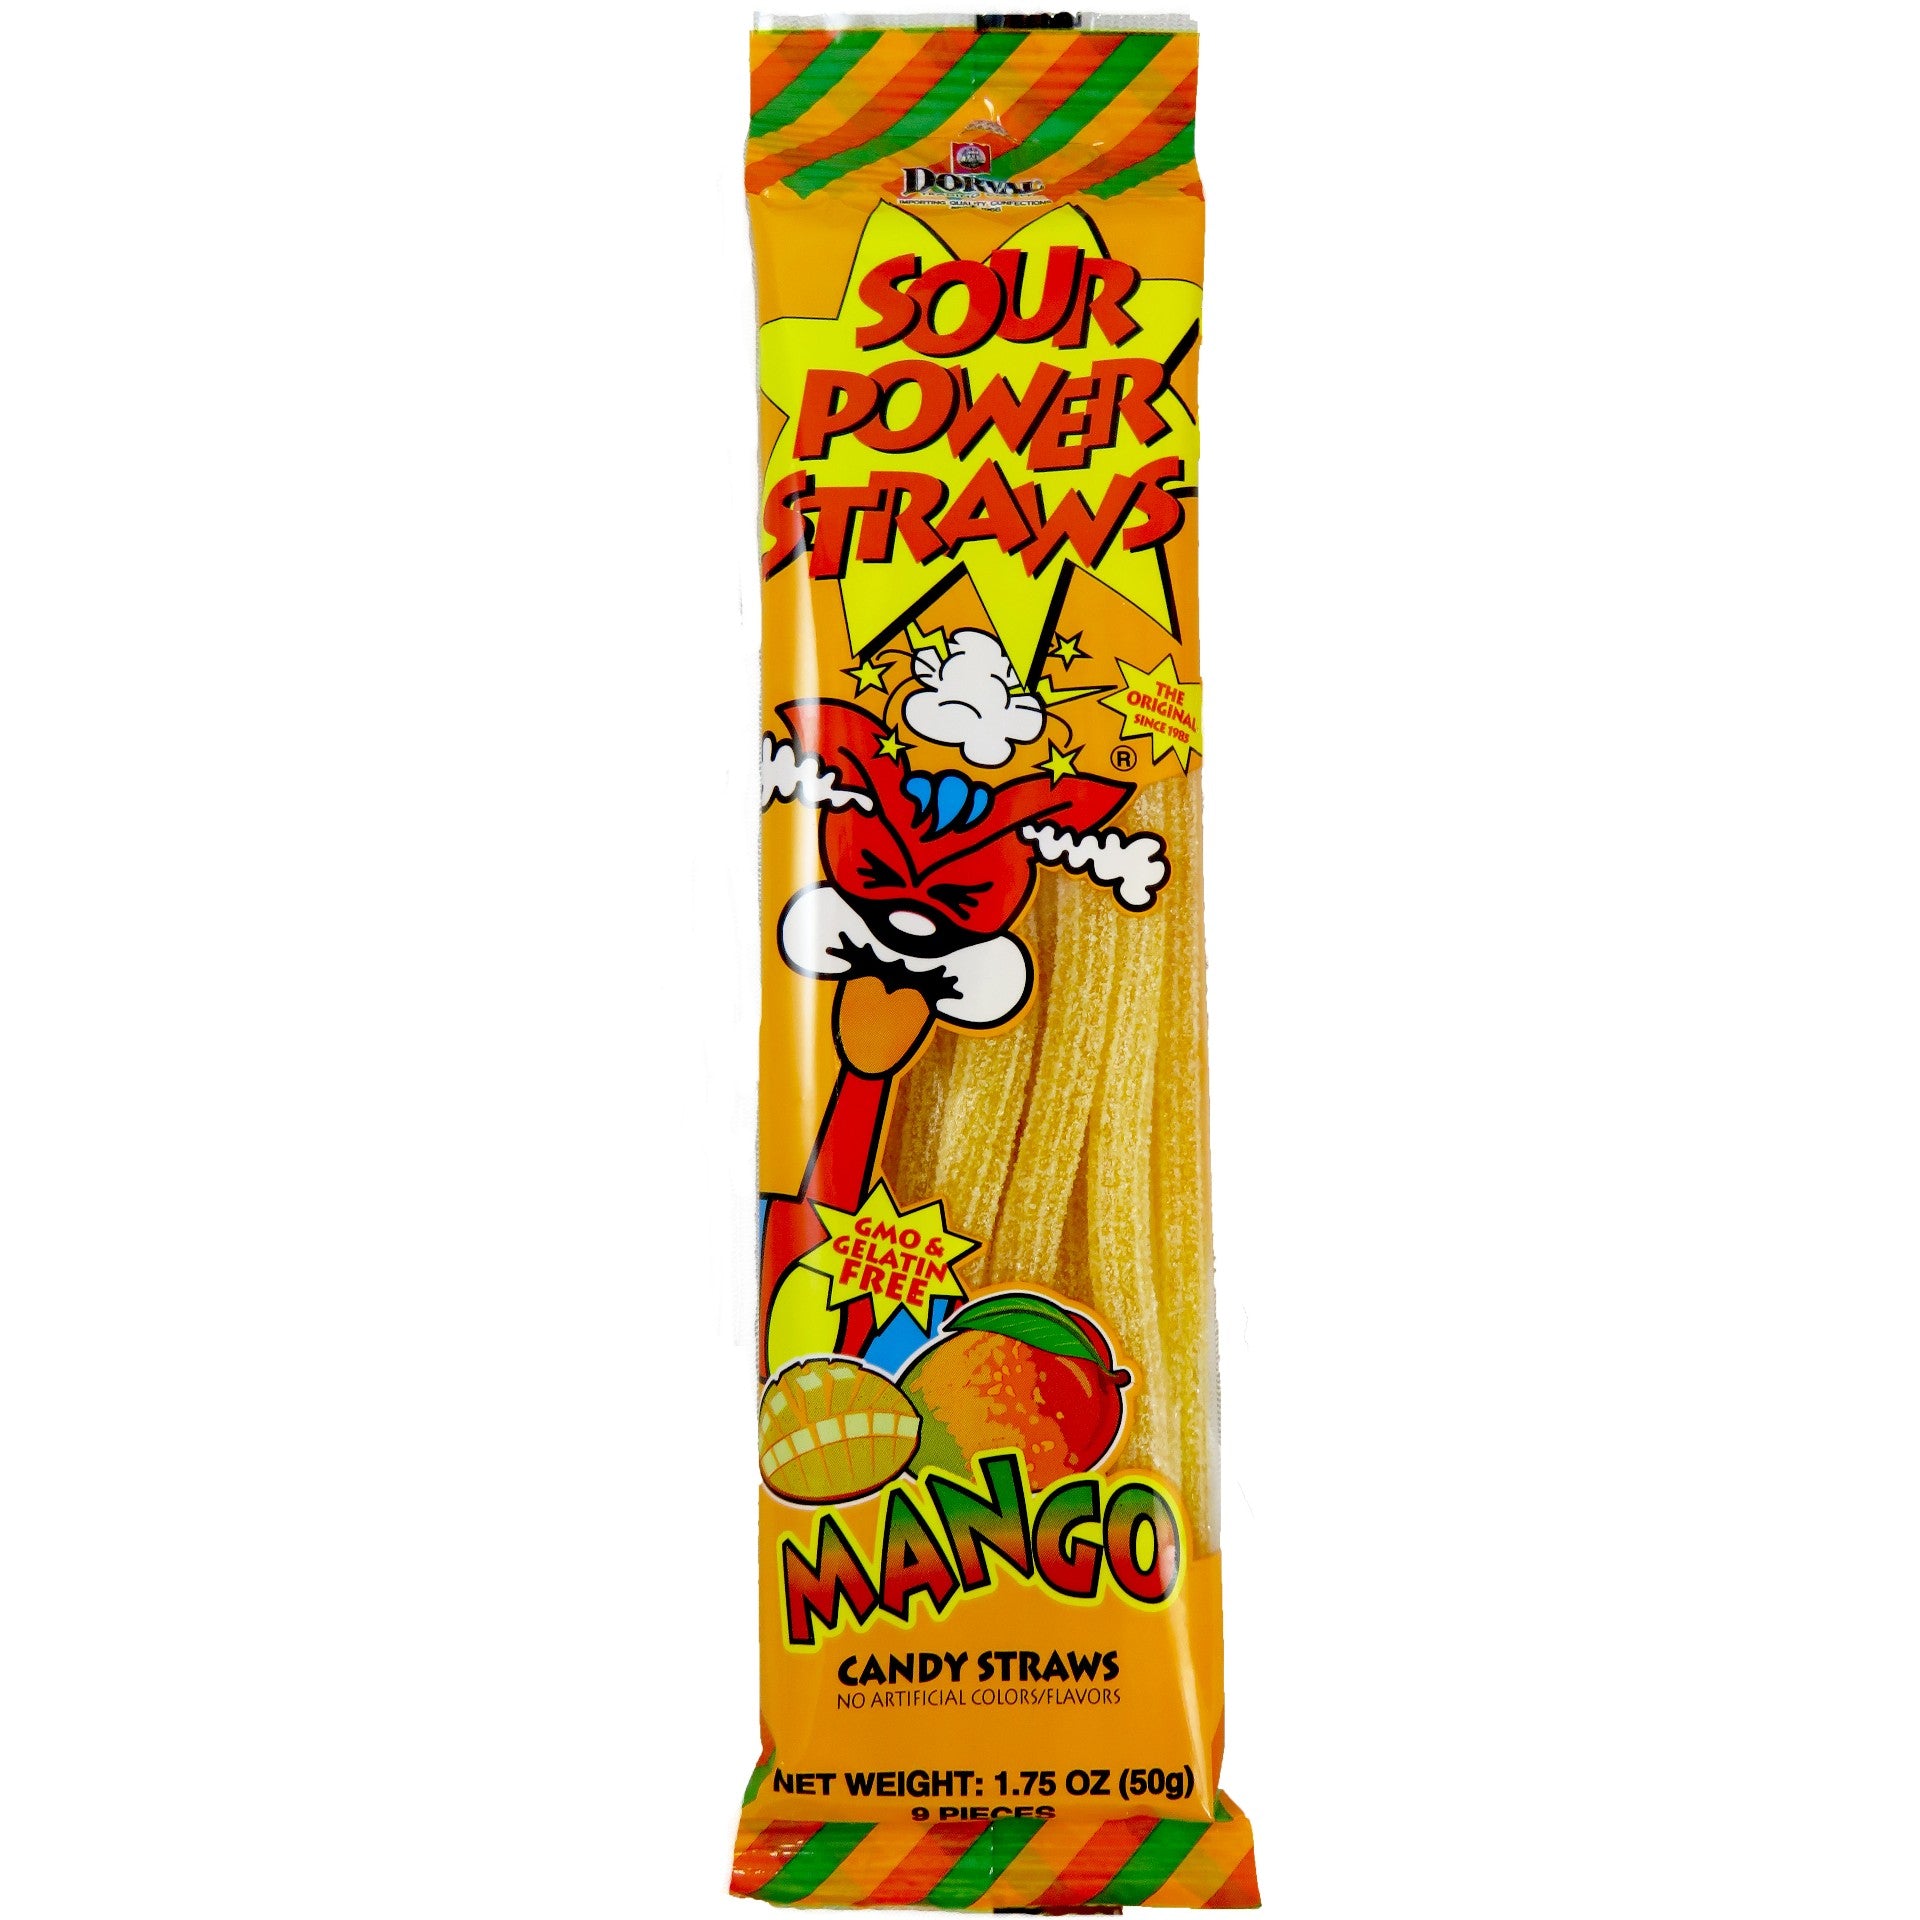 RETRO CANDY YUM Super Sour Candy Variety Pack - Assorted Sour Candy Bulk  Containing 20 Hand-Picked Candies in a Sturdy Gift Box includes Warheads 